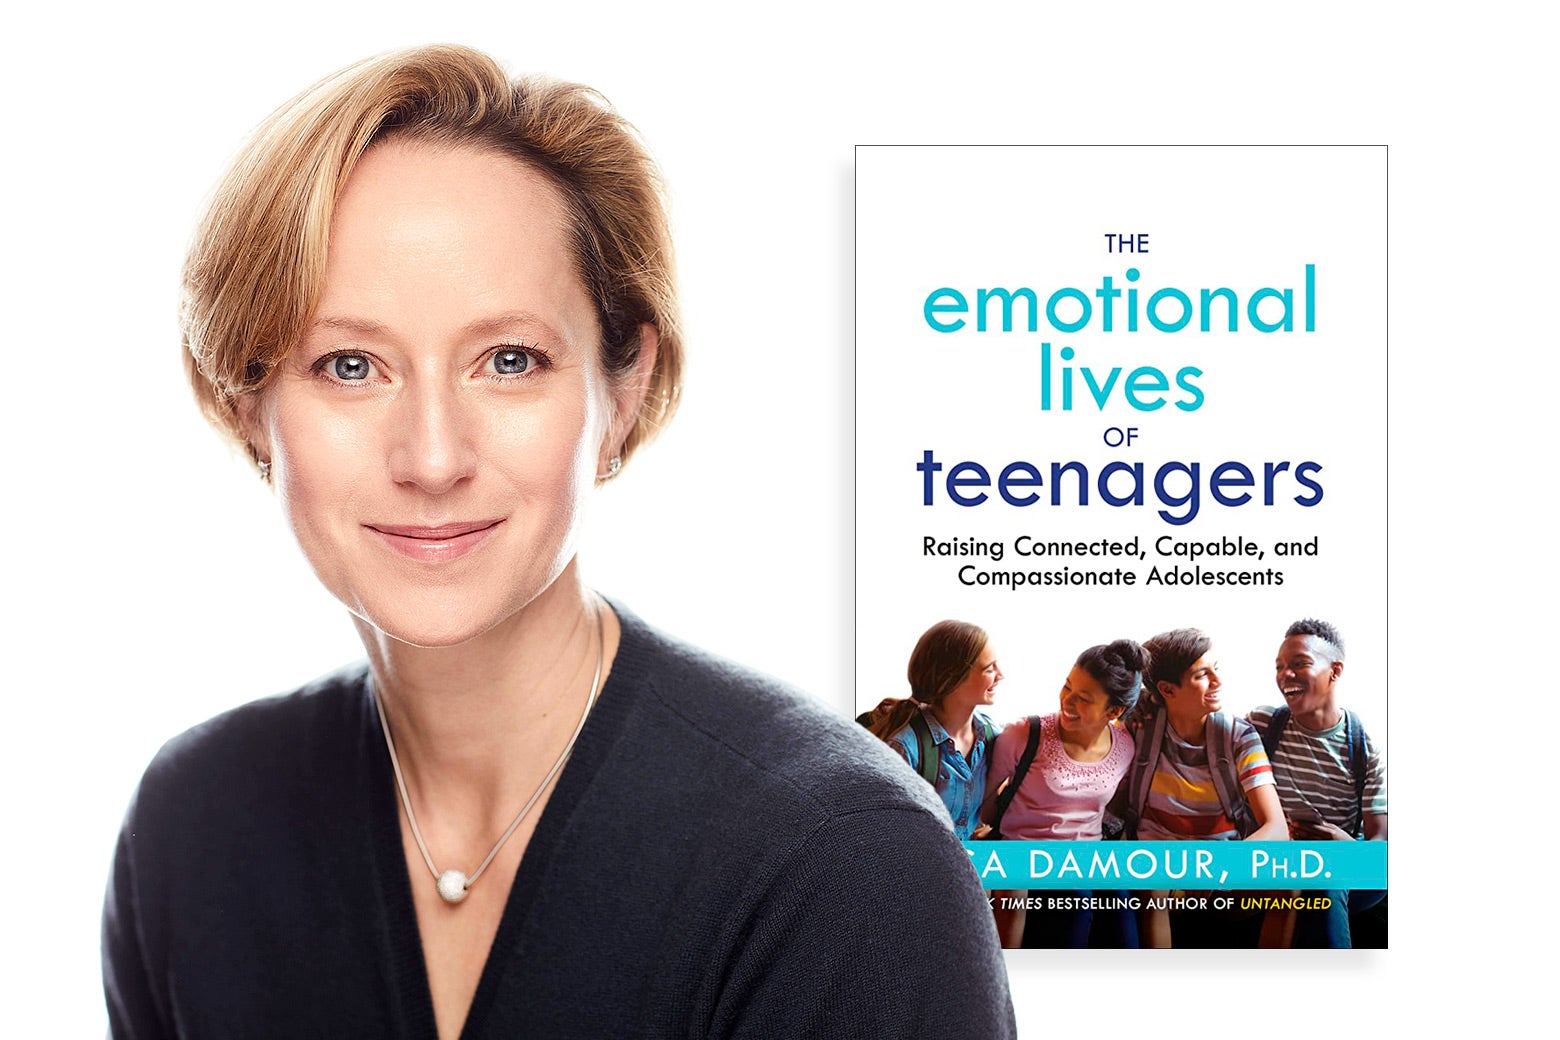 Author Lisa Damour with her new book, ‘The Emotional Lives of Teenagers’ 